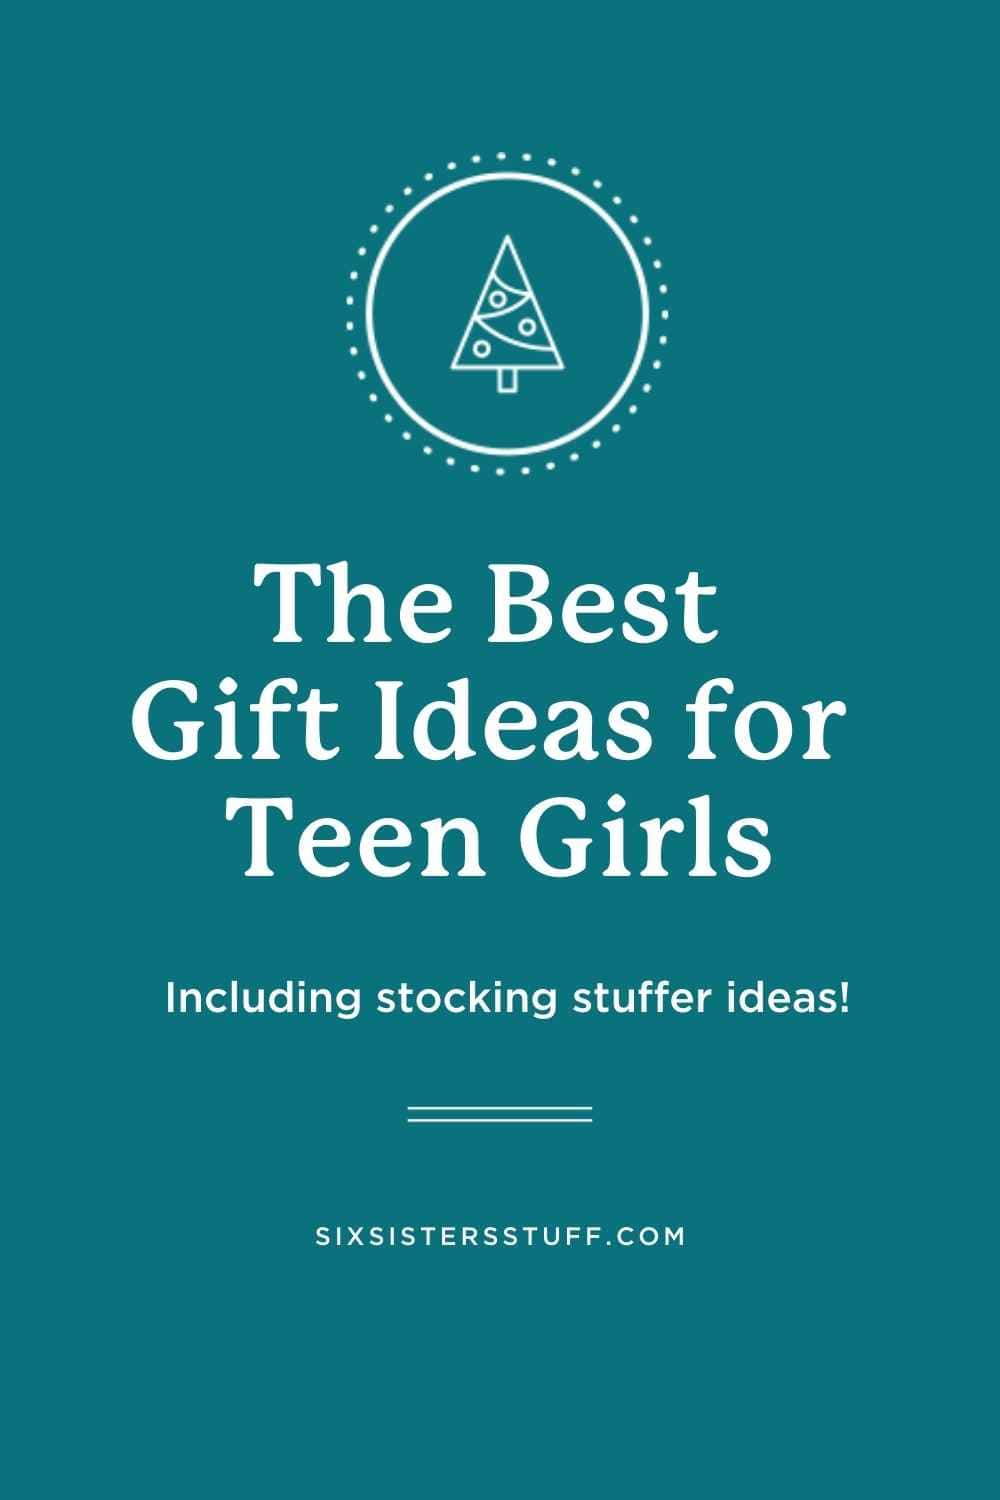 55 Best Stocking Stuffers to Gift This Year